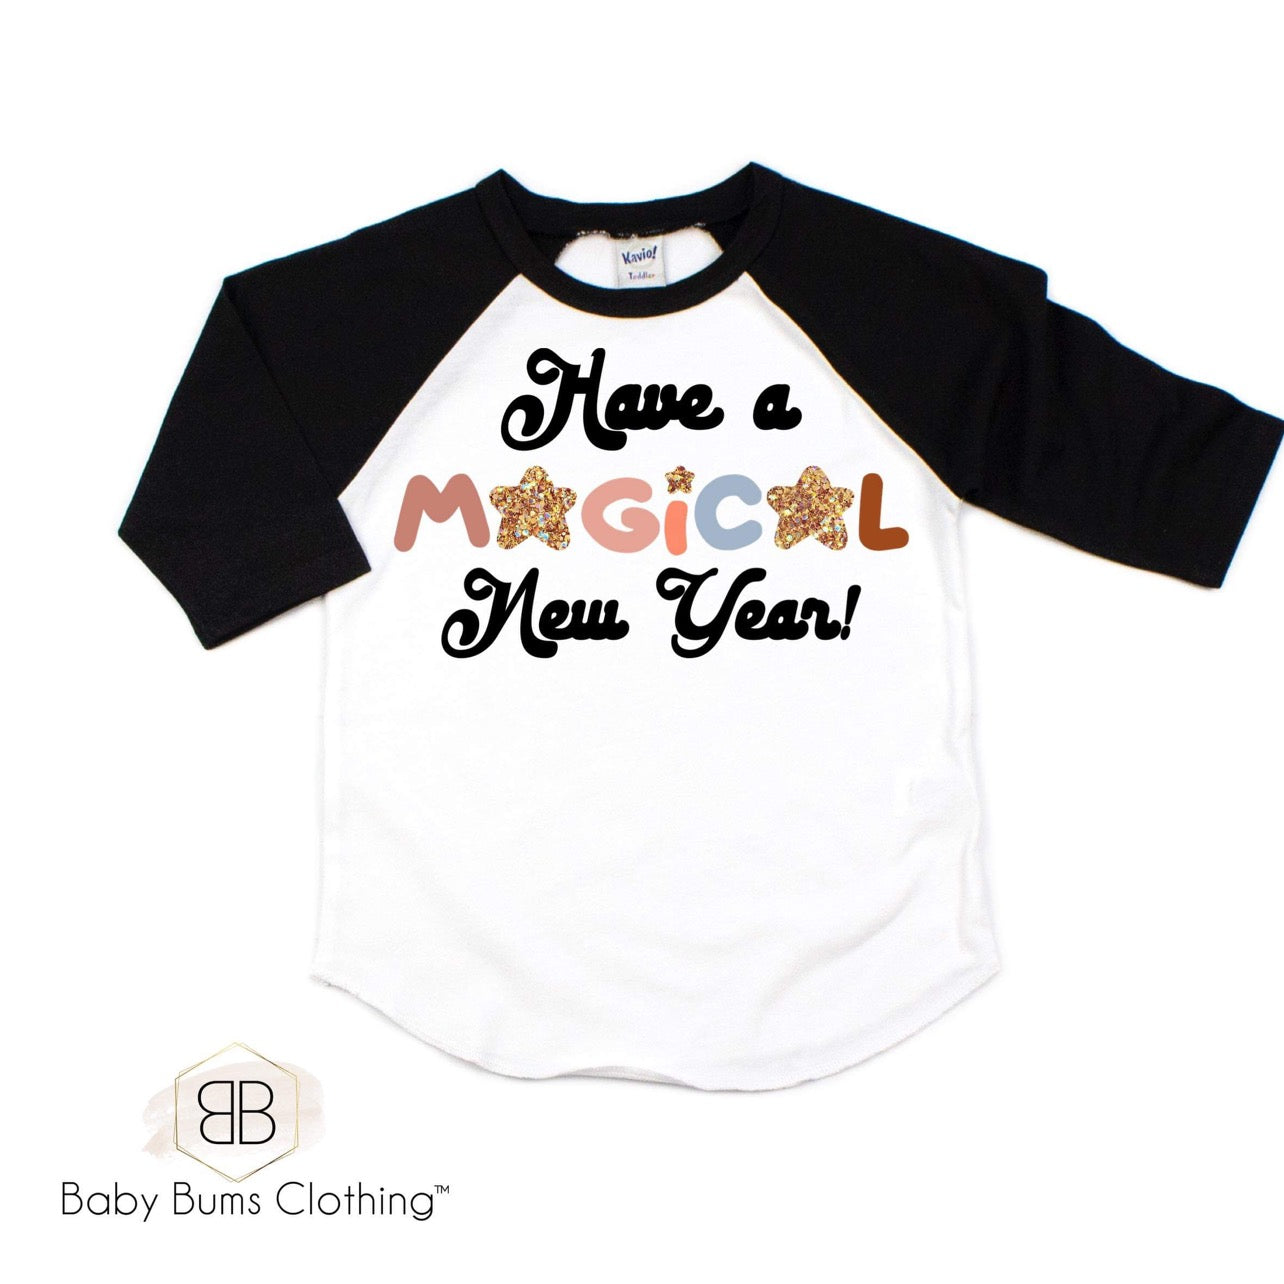 HAVE A MAGICAL NEW YEAR T-SHIRT - Baby Bums Clothing 